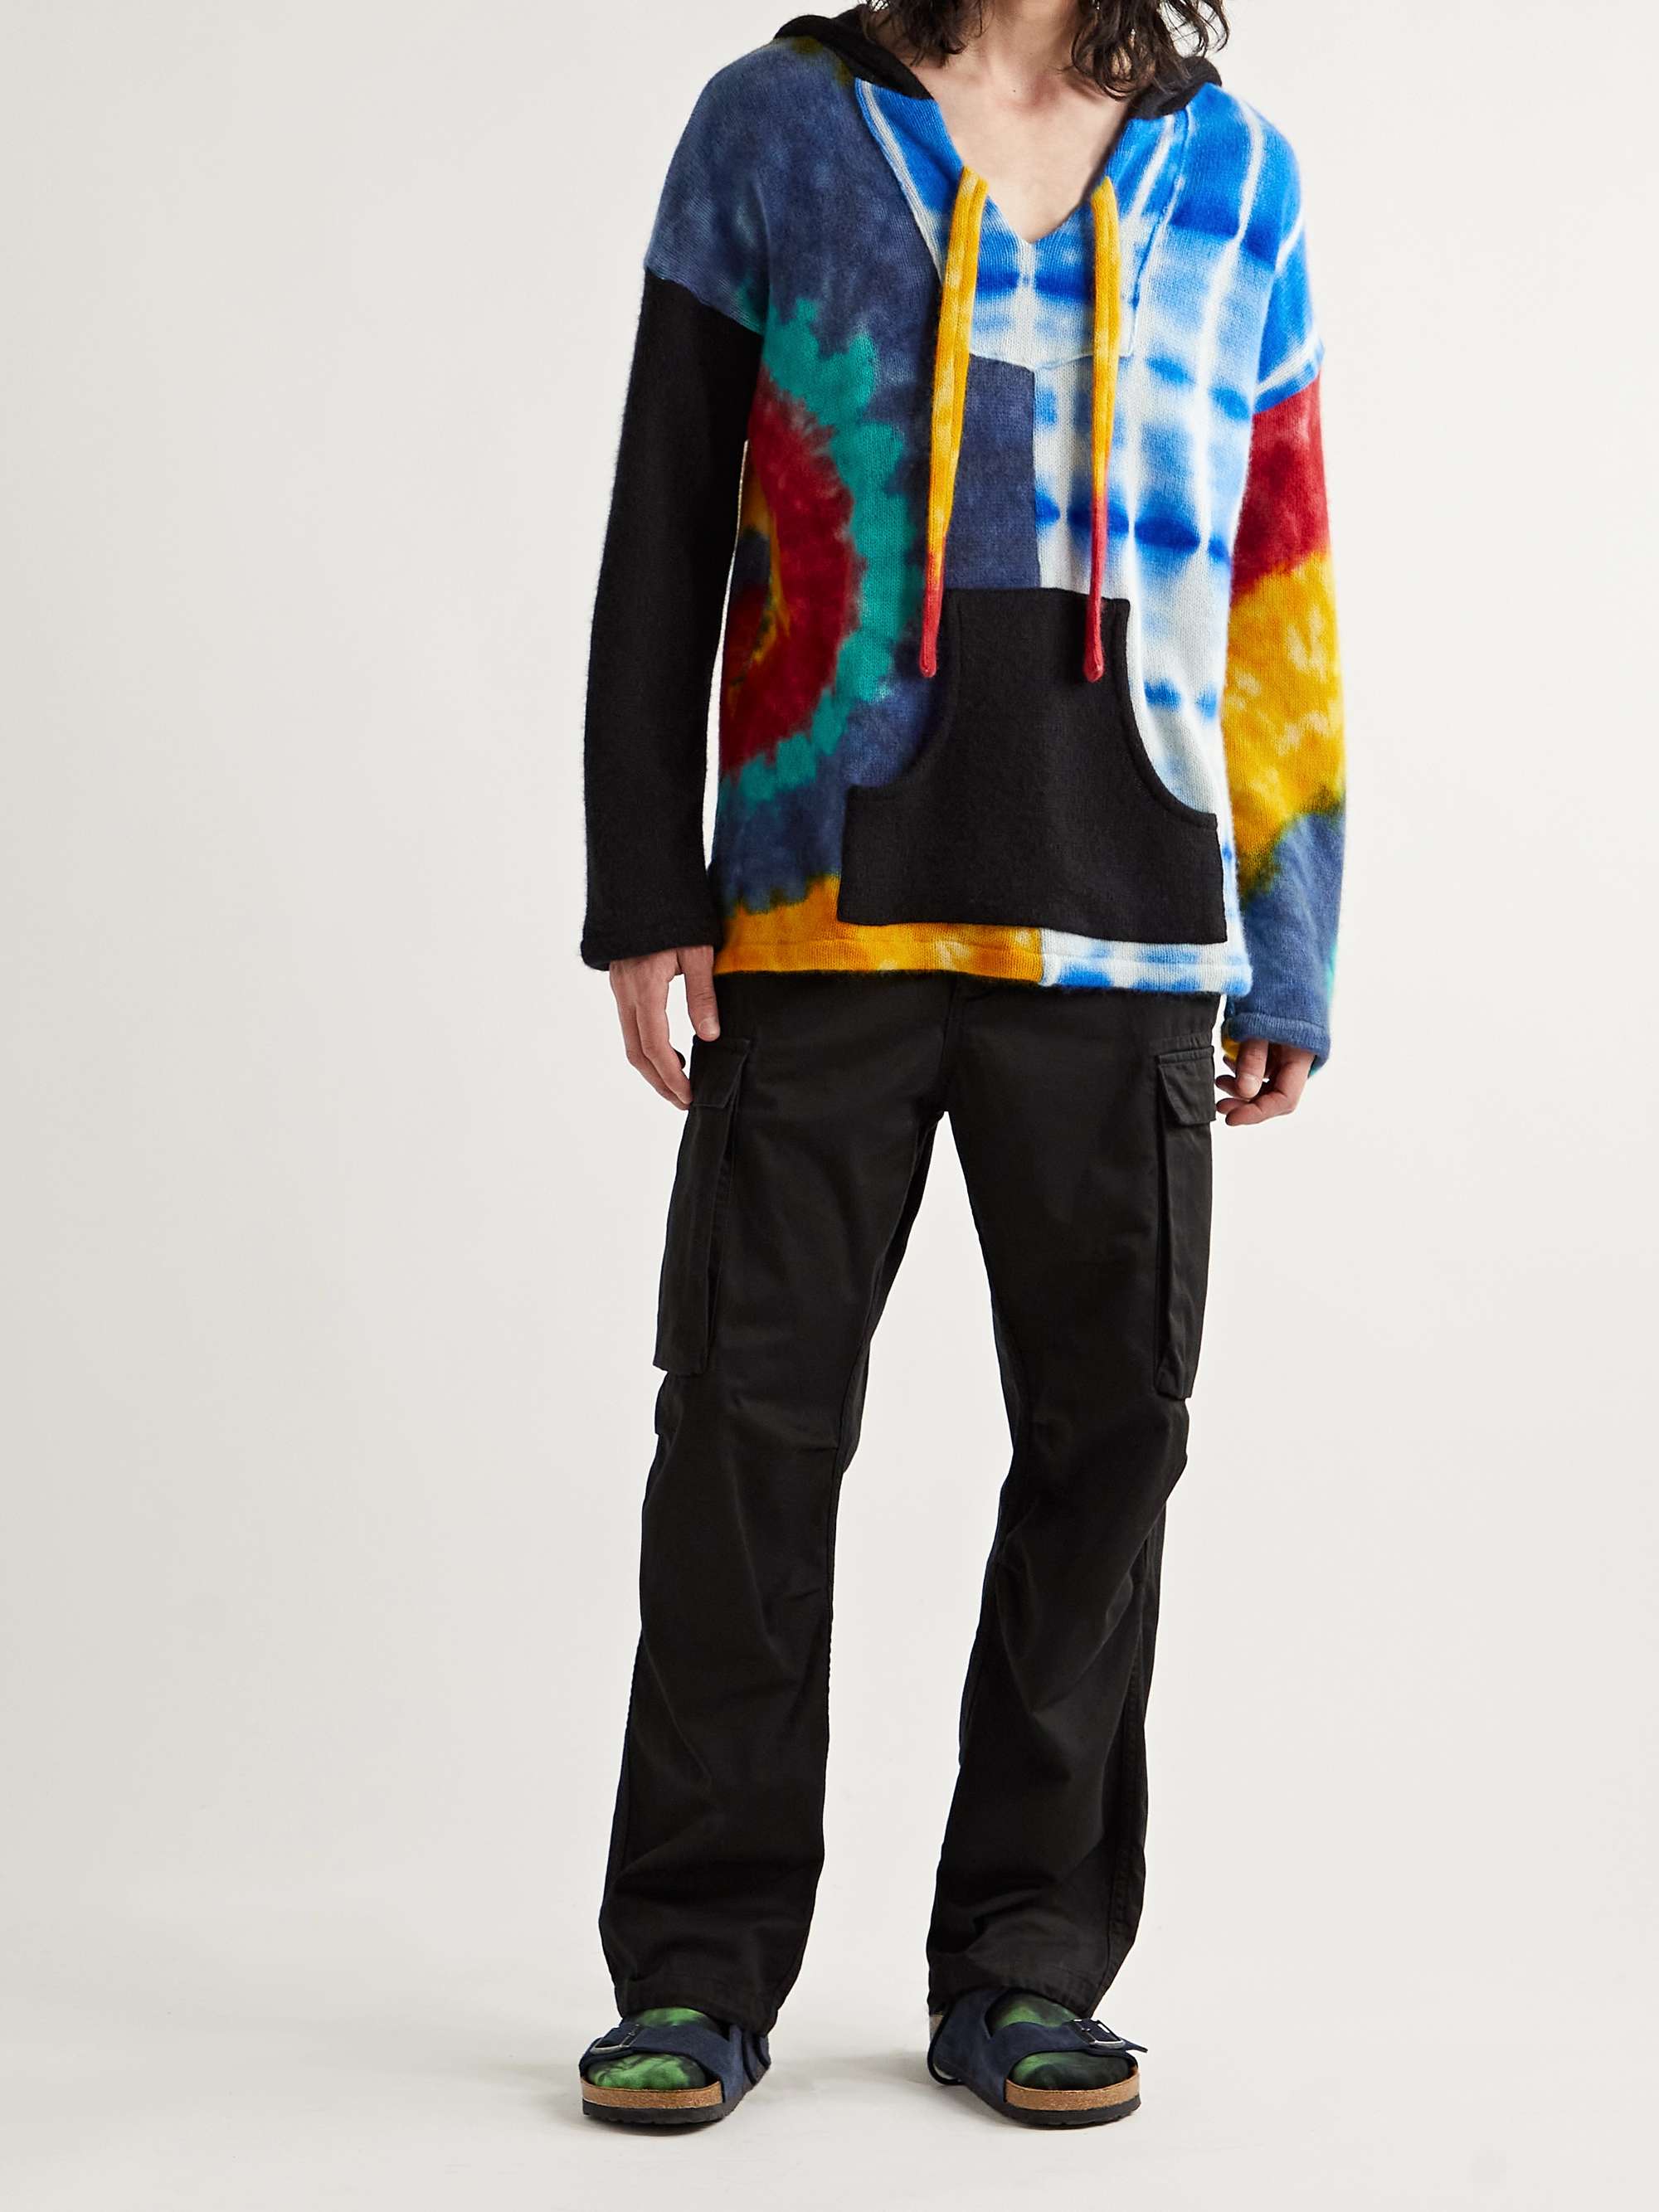 THE ELDER STATESMAN Patchwork Tie-Dyed Cashmere Hooded Sweater